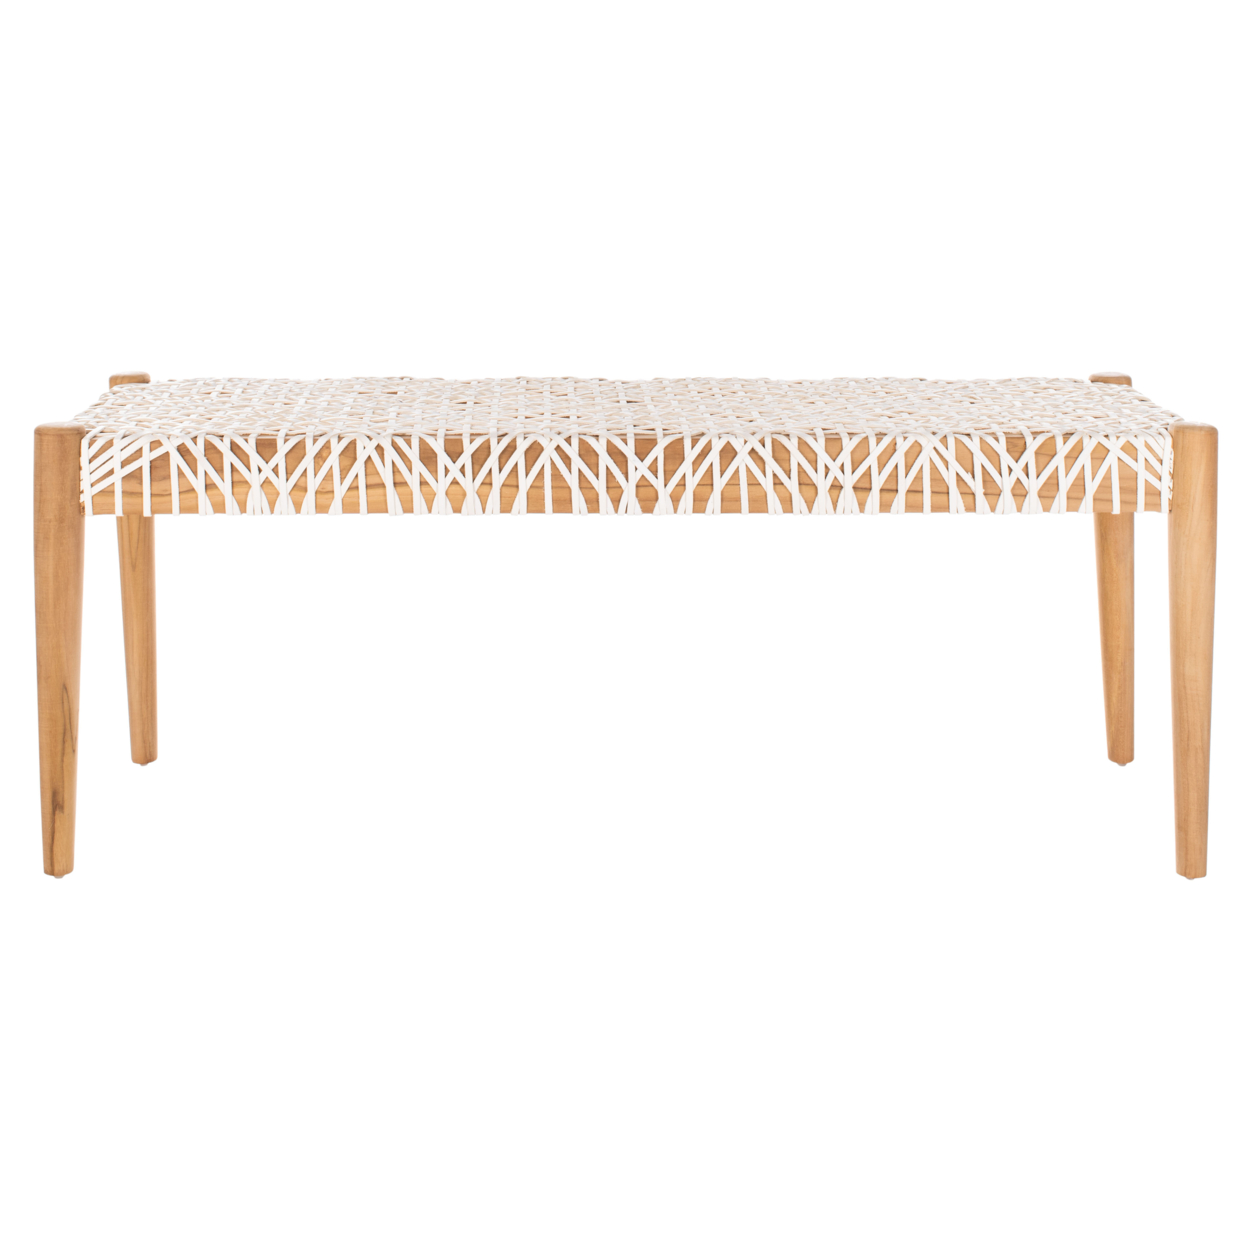 SAFAVIEH Bandelier Leather Weave Bench Off White / Natural